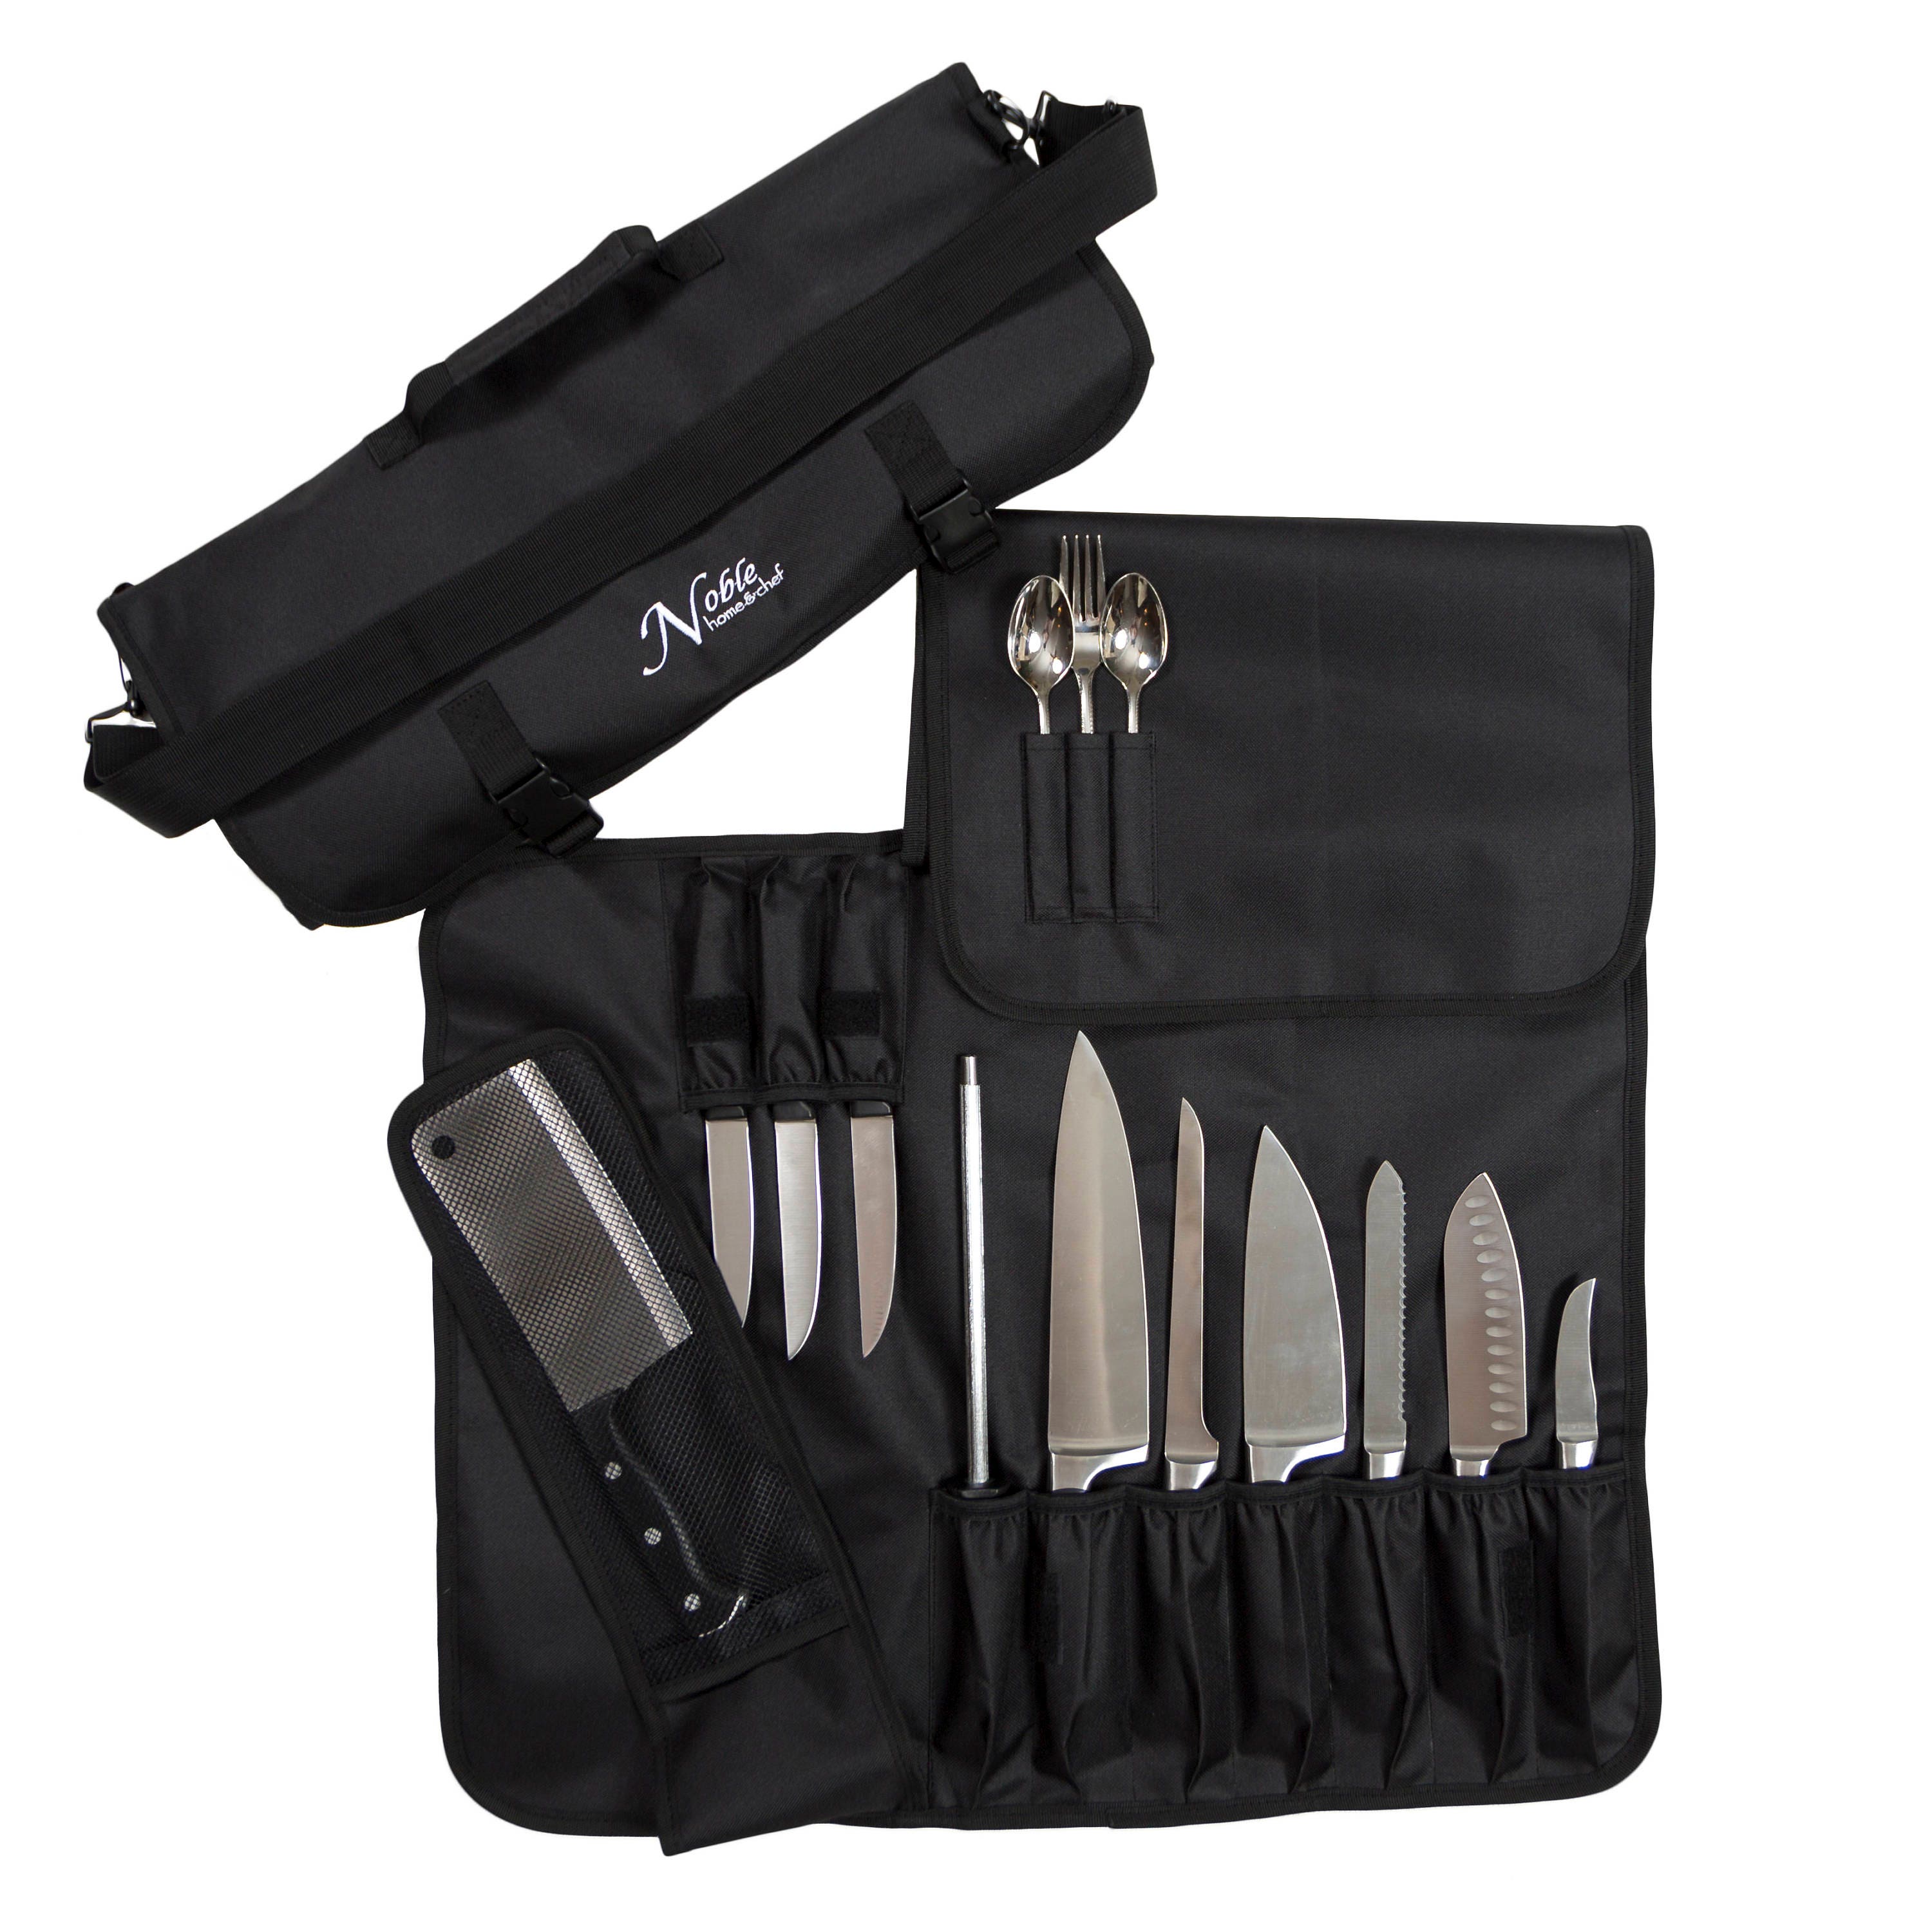  Noble Home & Chef 5-Piece Universal Knife Guards are Felt  Lined, Durable, No BPA, and Gentle on Blades, Knife Covers Are Non-Toxic  and Abrasion Resistant! (Knives Not Included): Home & Kitchen